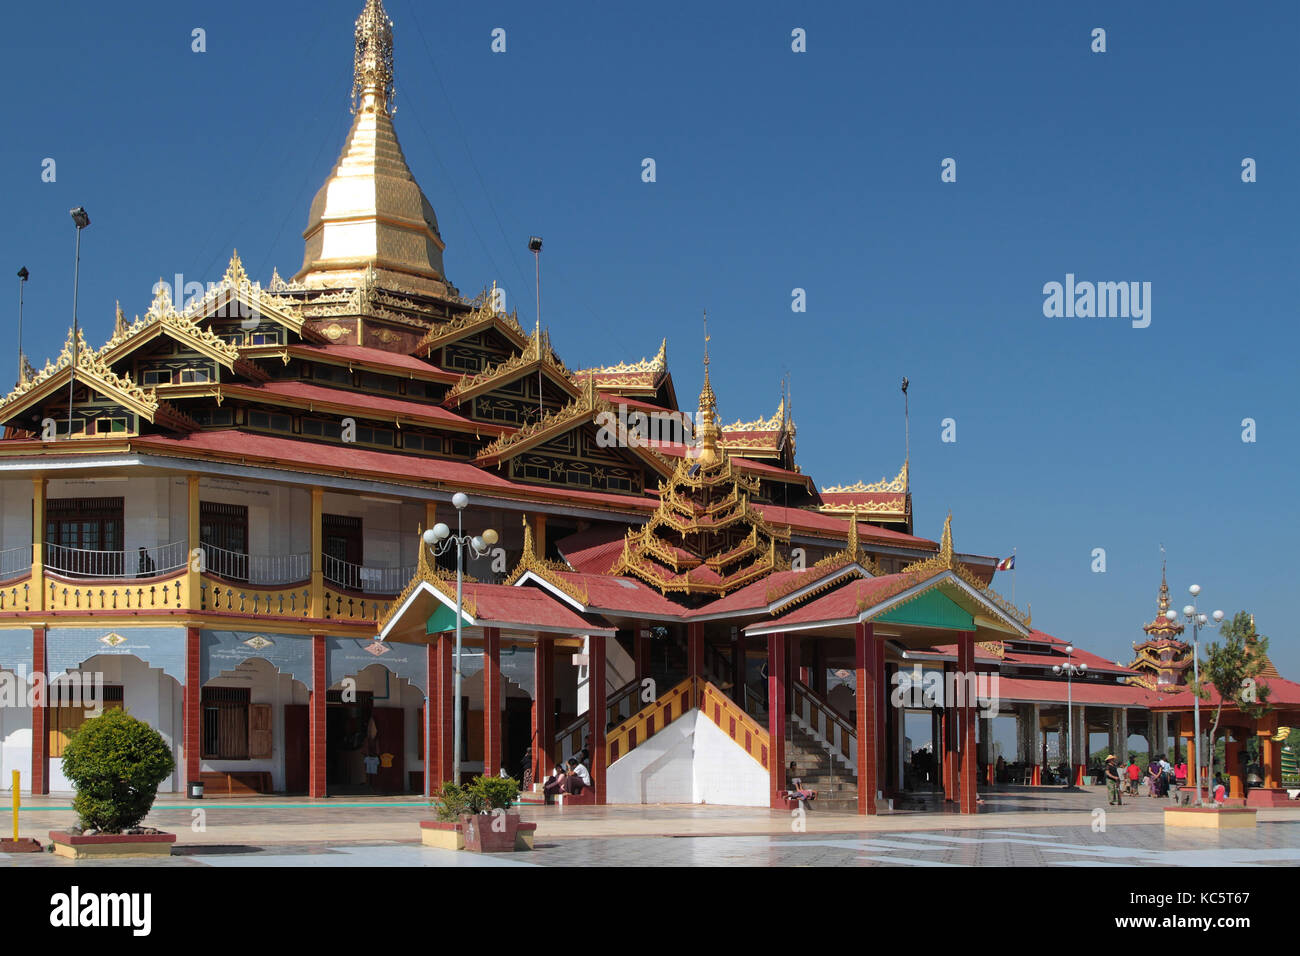 INLE LAKE, MYANMAR, December 15, 2014 : Phaung Daw Oo La pagoda, the most important place of worship around the lake Stock Photo